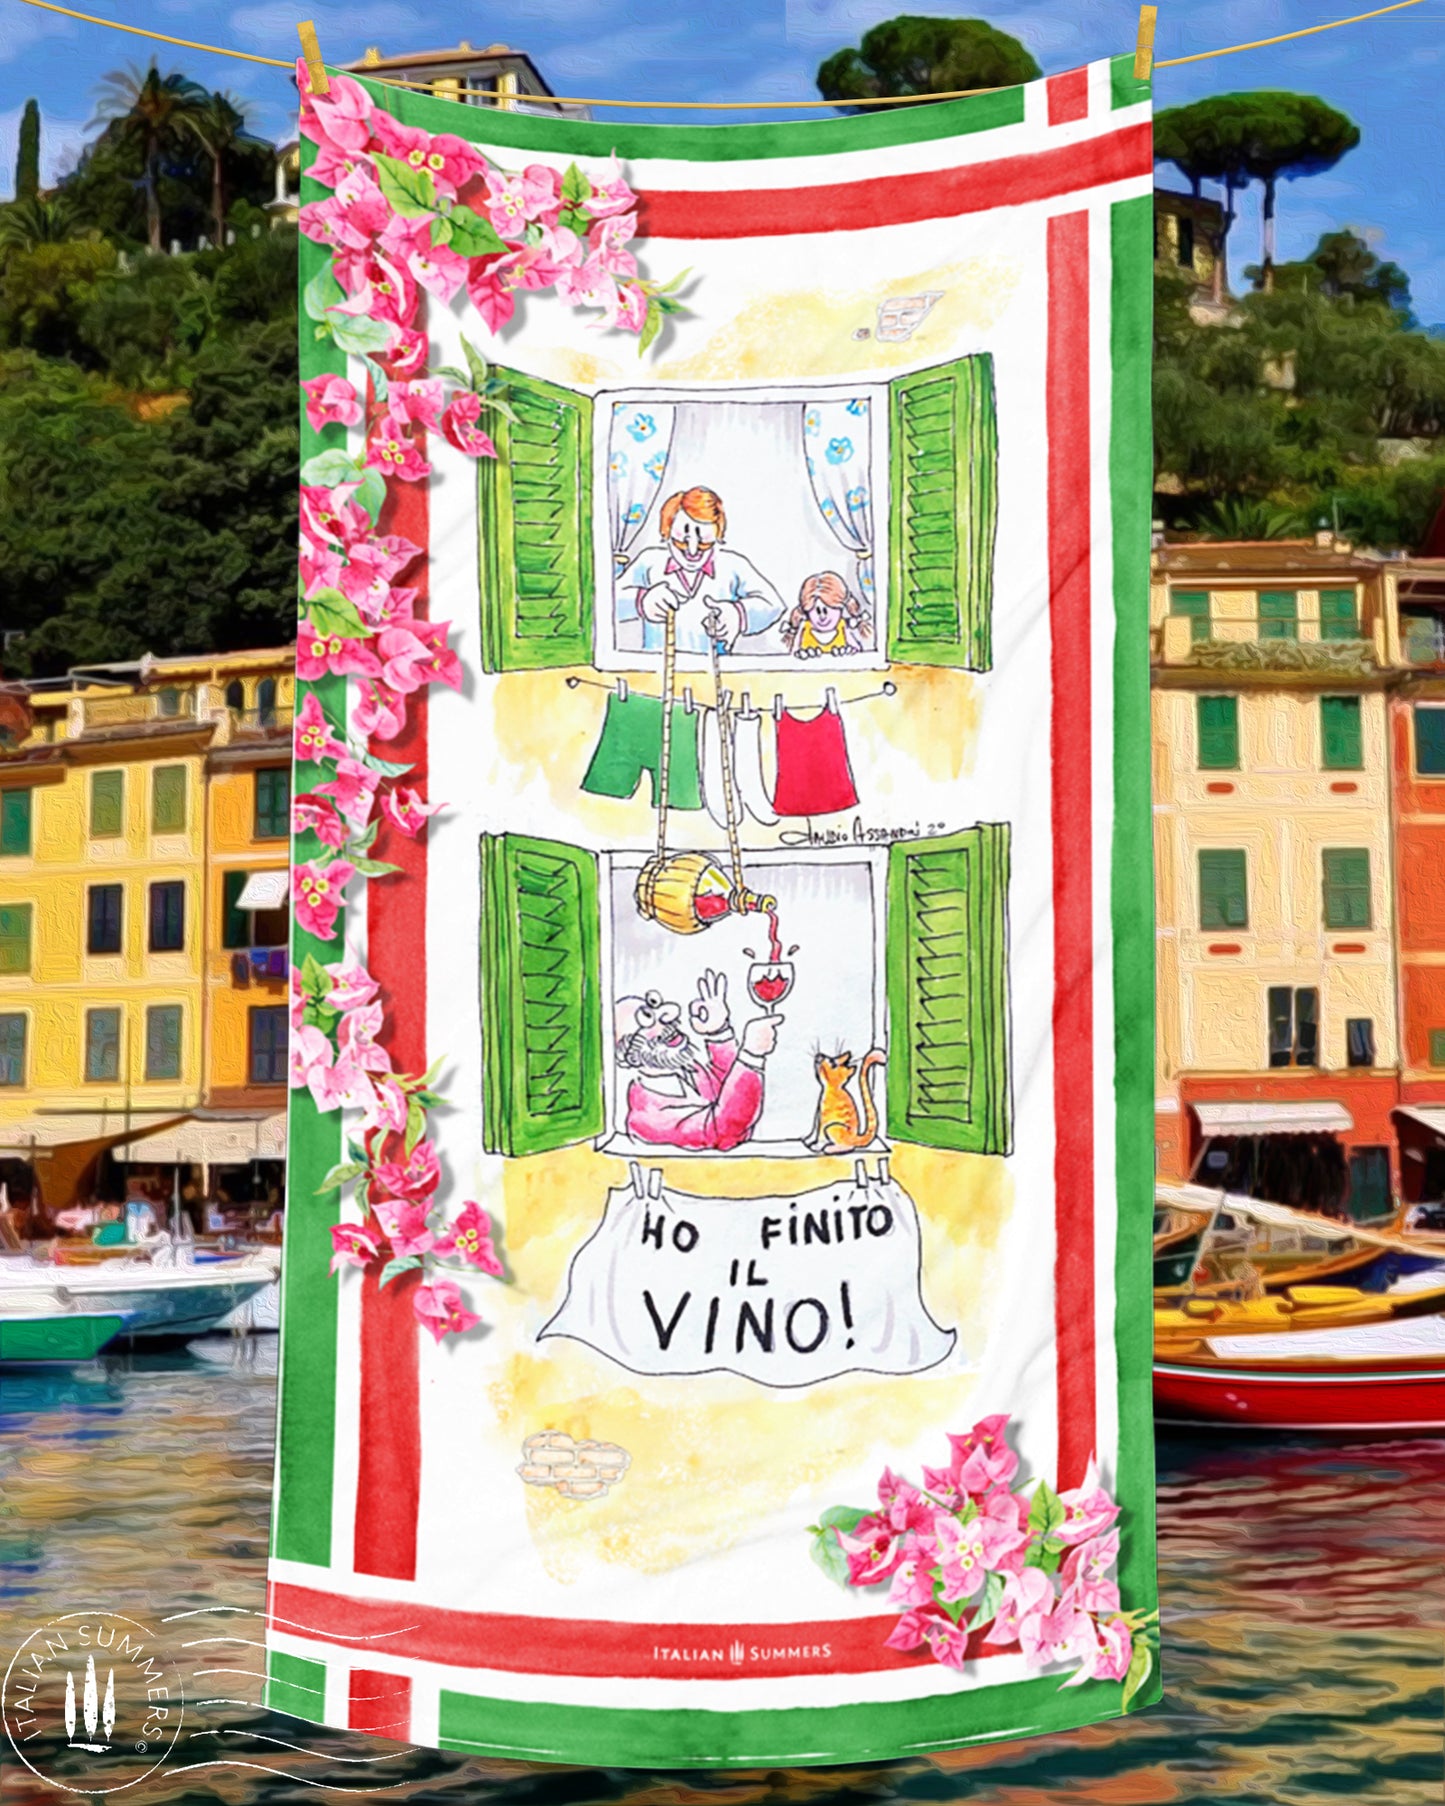 Italy inspired beachtowel depicting a hand painted illustration of an Italian dad with his small daughter at their window, lowering a flask of good Chianti wine on a rope to serve their downstairs neighbor who ran out of wine during the 2020 lockdown. Italian solidarity at play! Made by Italian Summers